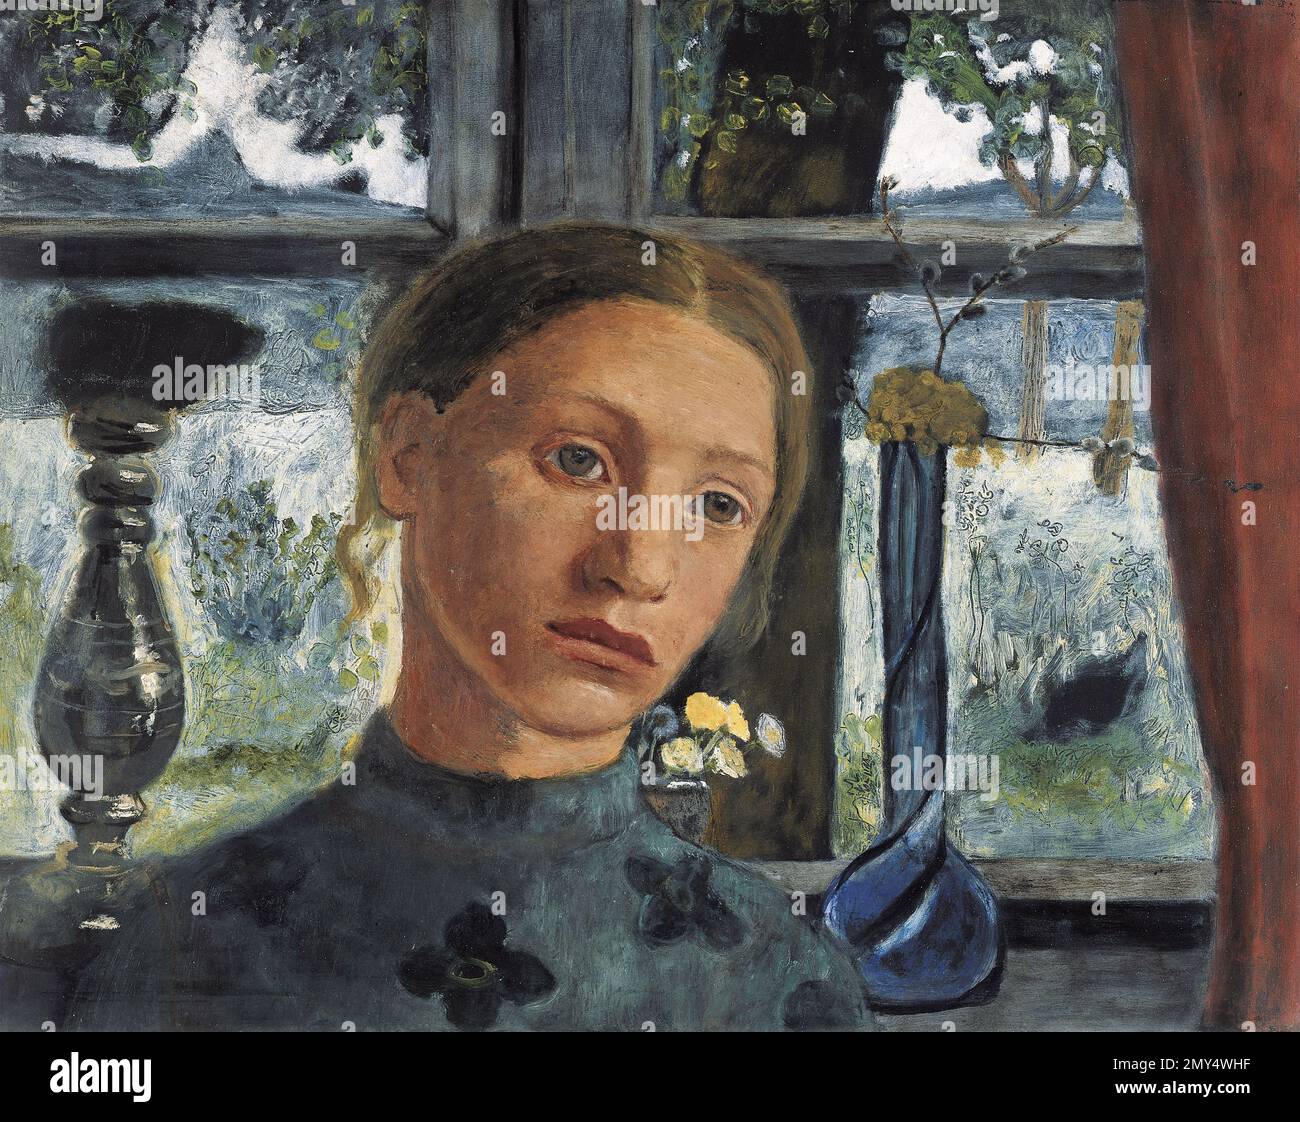 Paula Modersohn-Becker. Painting entitled 'Girl's Head in Front of a Window' by the German Expressionist painter, Paula Modersohn-Becker (1876-1907), c. 1902 Stock Photo